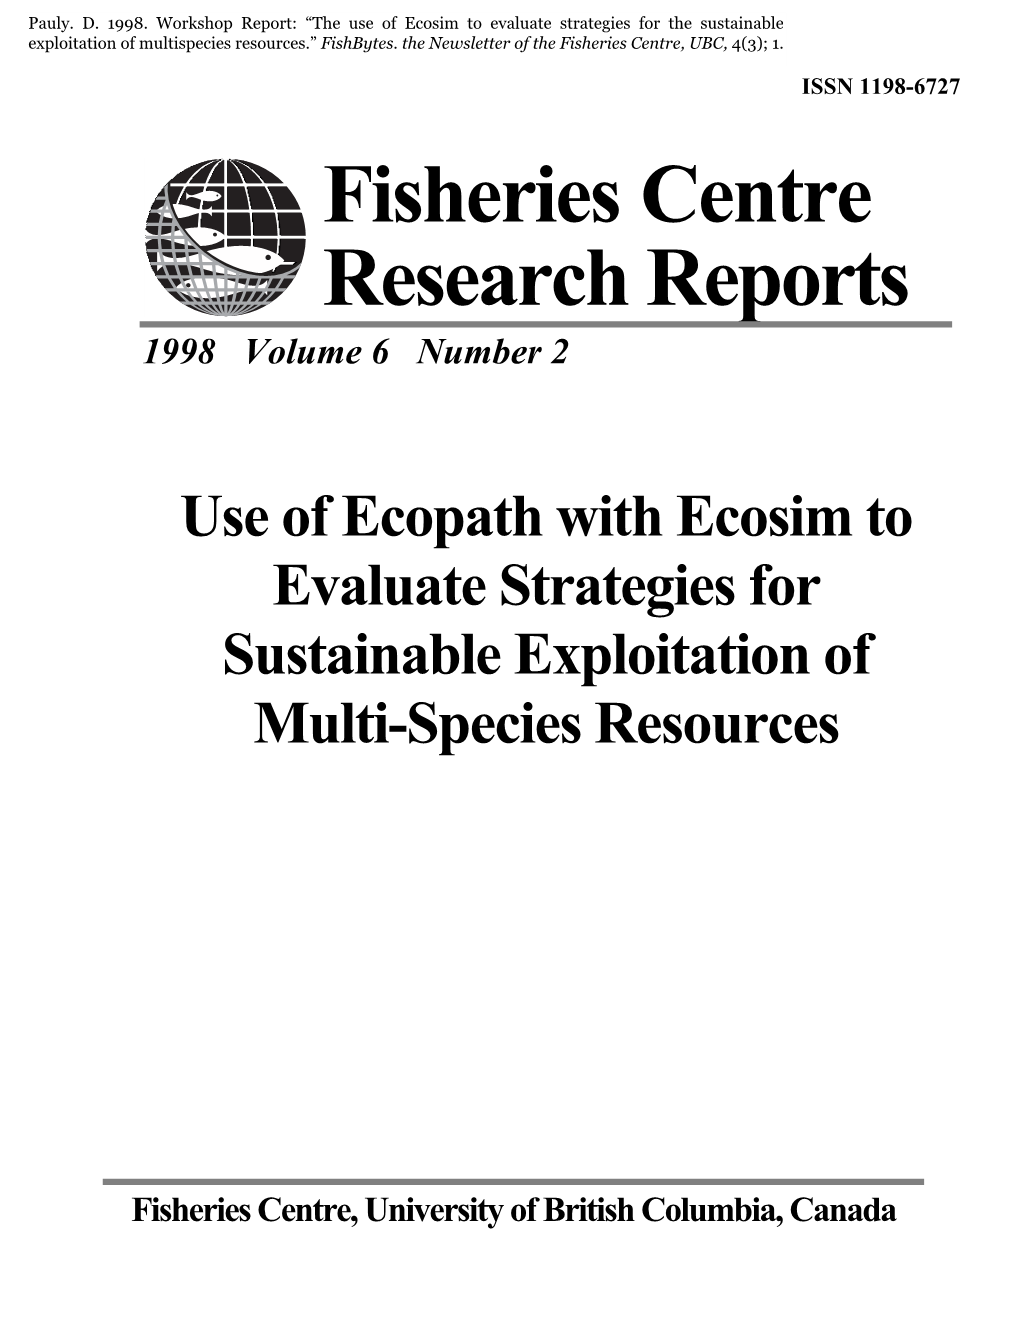 Fisheries Centre Research Reports 1998 Volume 6 Number 2